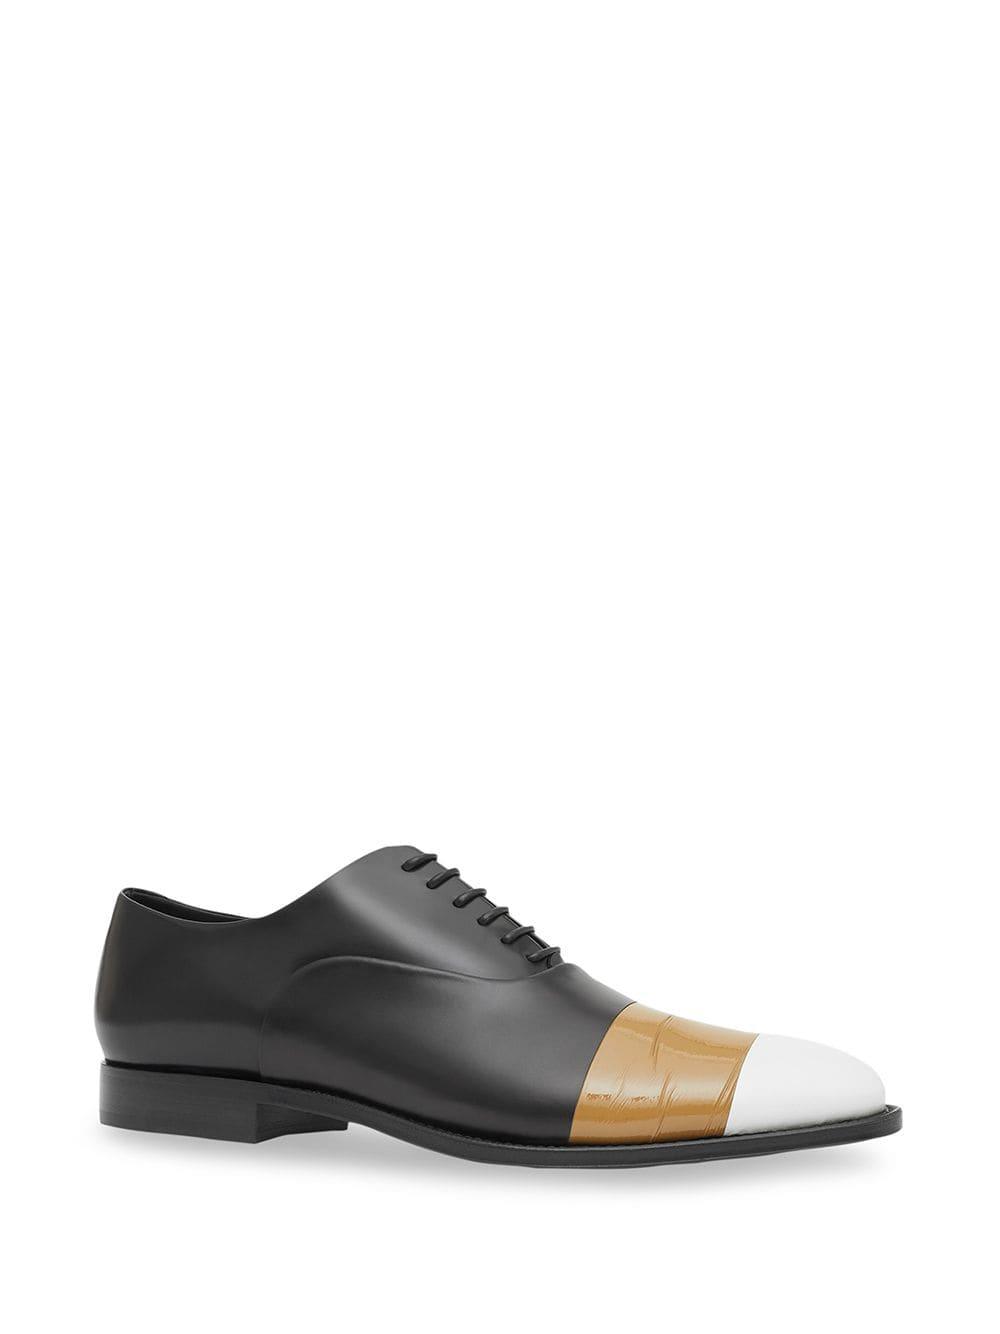 Defined Details: Burberry Tape Detail Leather Oxford Shoes